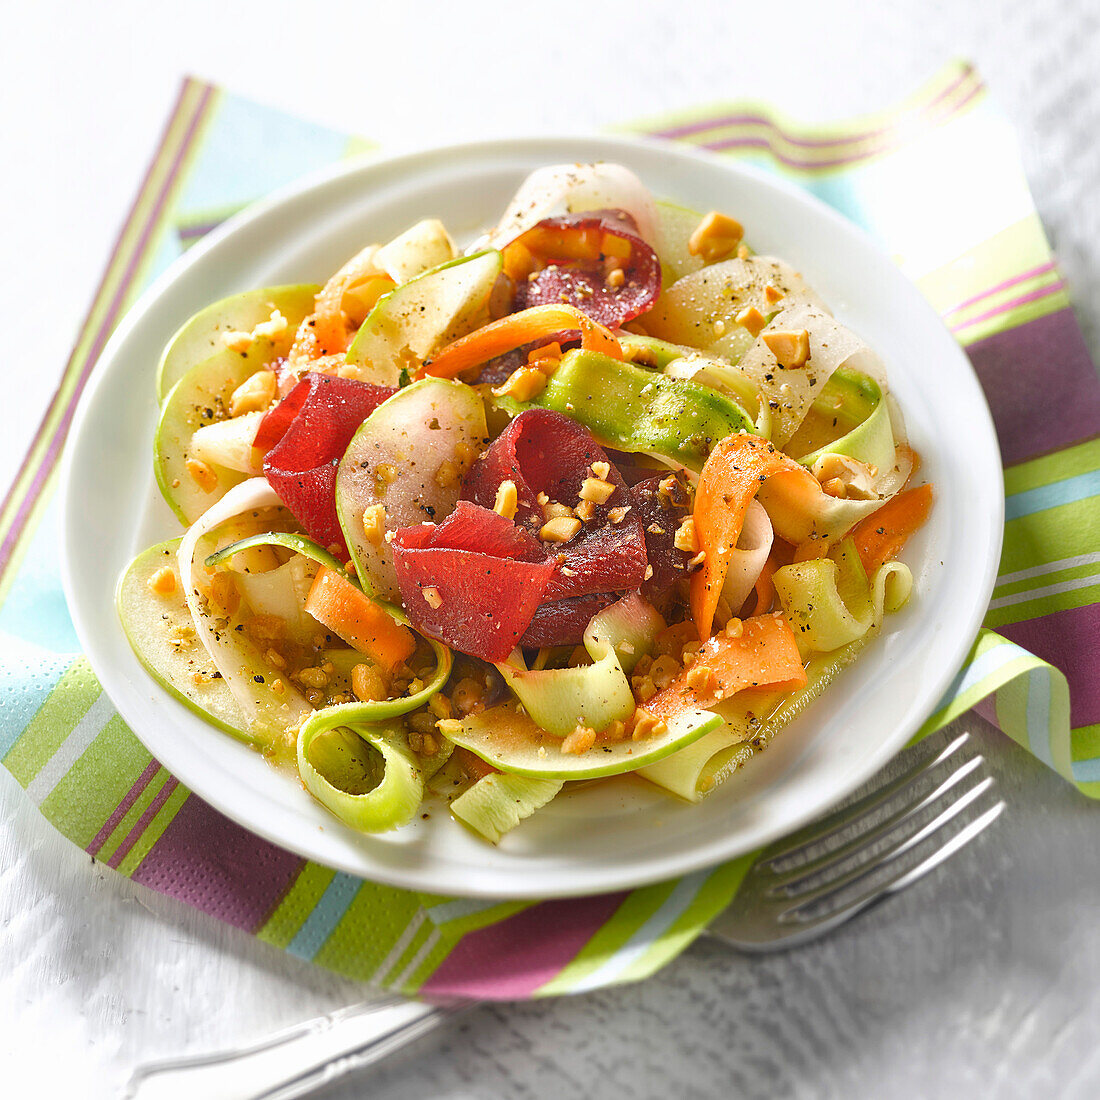 Thai salad with vegetable, meat and fruit strips